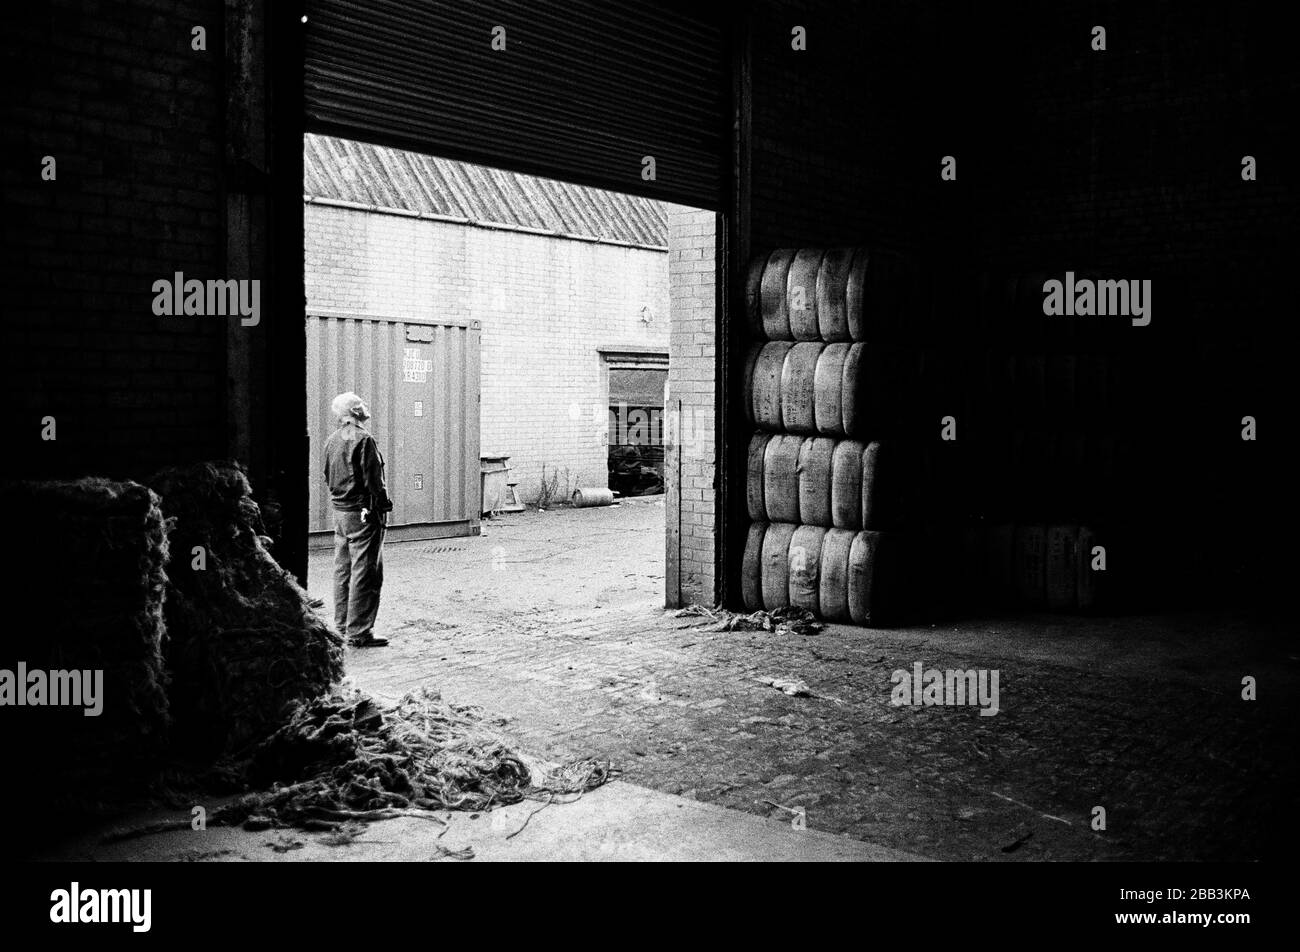 A worker awaiting a delivery at Tay Spinners mill in Dundee, Scotland. This factory was the last jute spinning mill in Europe when it closed for the final time in 1998. The city of Dundee had been famous throughout history for the three 'Js' - jute, jam and journalism. Stock Photo